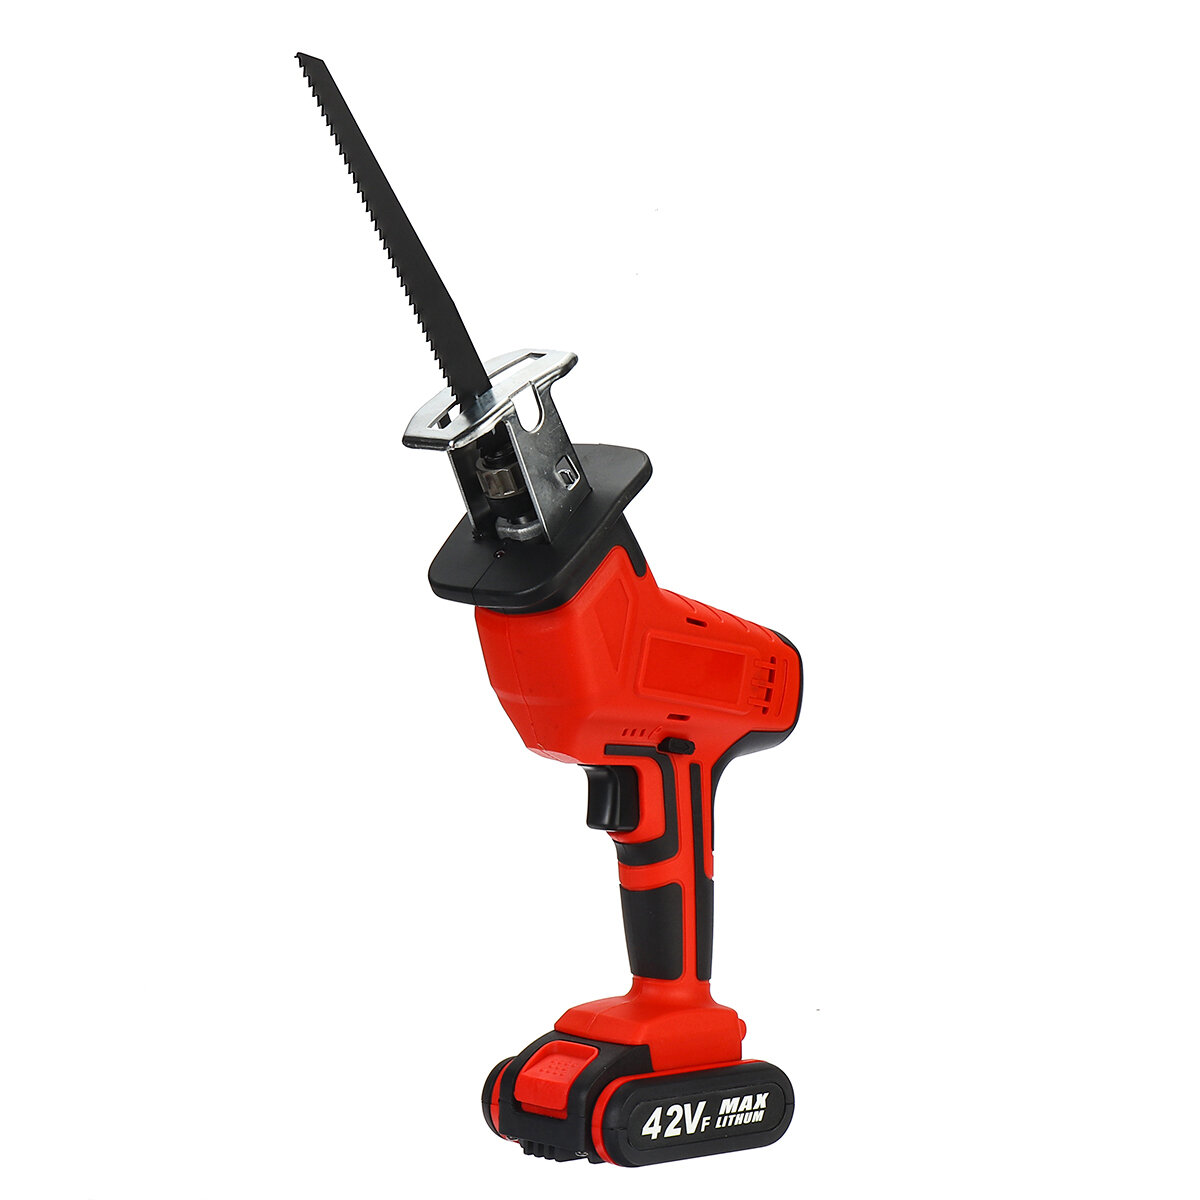 Image of 42VF 13000mAh Cordless Reciprocating Saw Electric Saws Portable Woodworking Power Tools